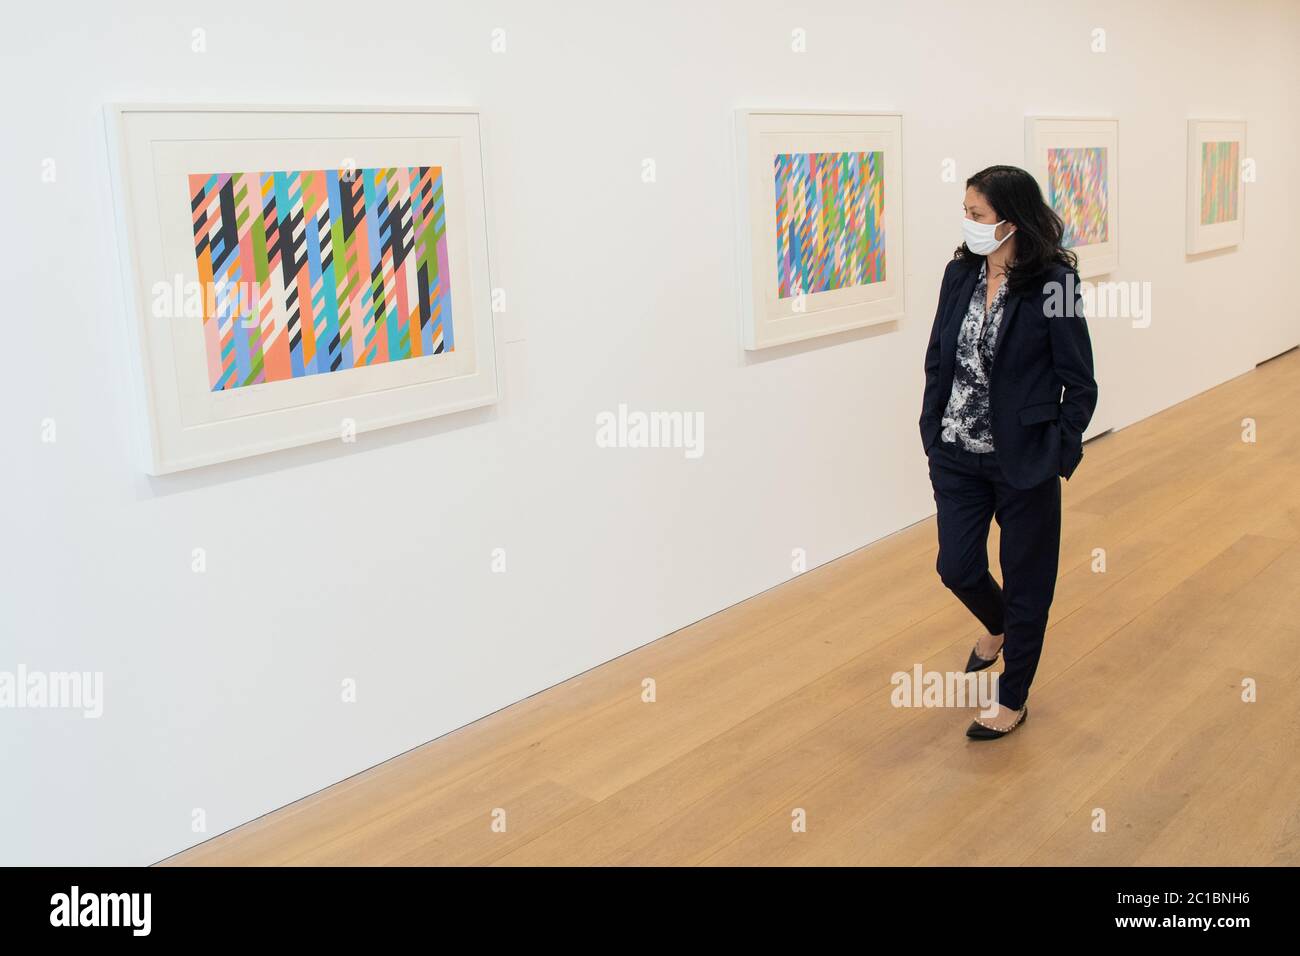 Angela Choon views artworks by Bridget Riley at the David Zwirner modern art gallery in Mayfair, London as non-essential shops in England open their doors to customers for the first time since coronavirus lockdown restrictions were imposed in March. Stock Photo